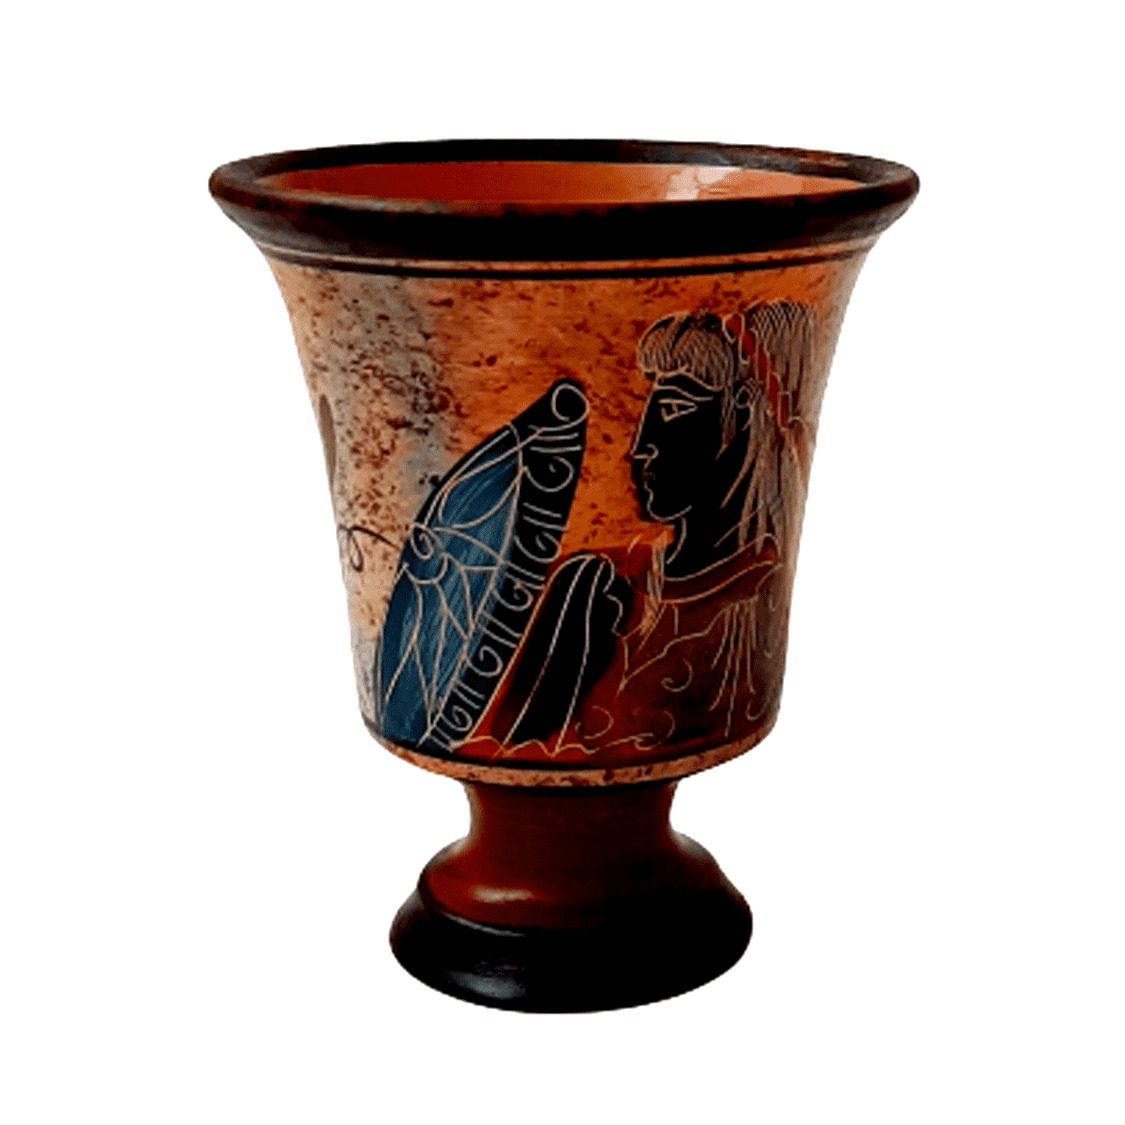 Pythagorean cup,Greedy cup 11cm ,Multicolored and glazed,Showing Achilles